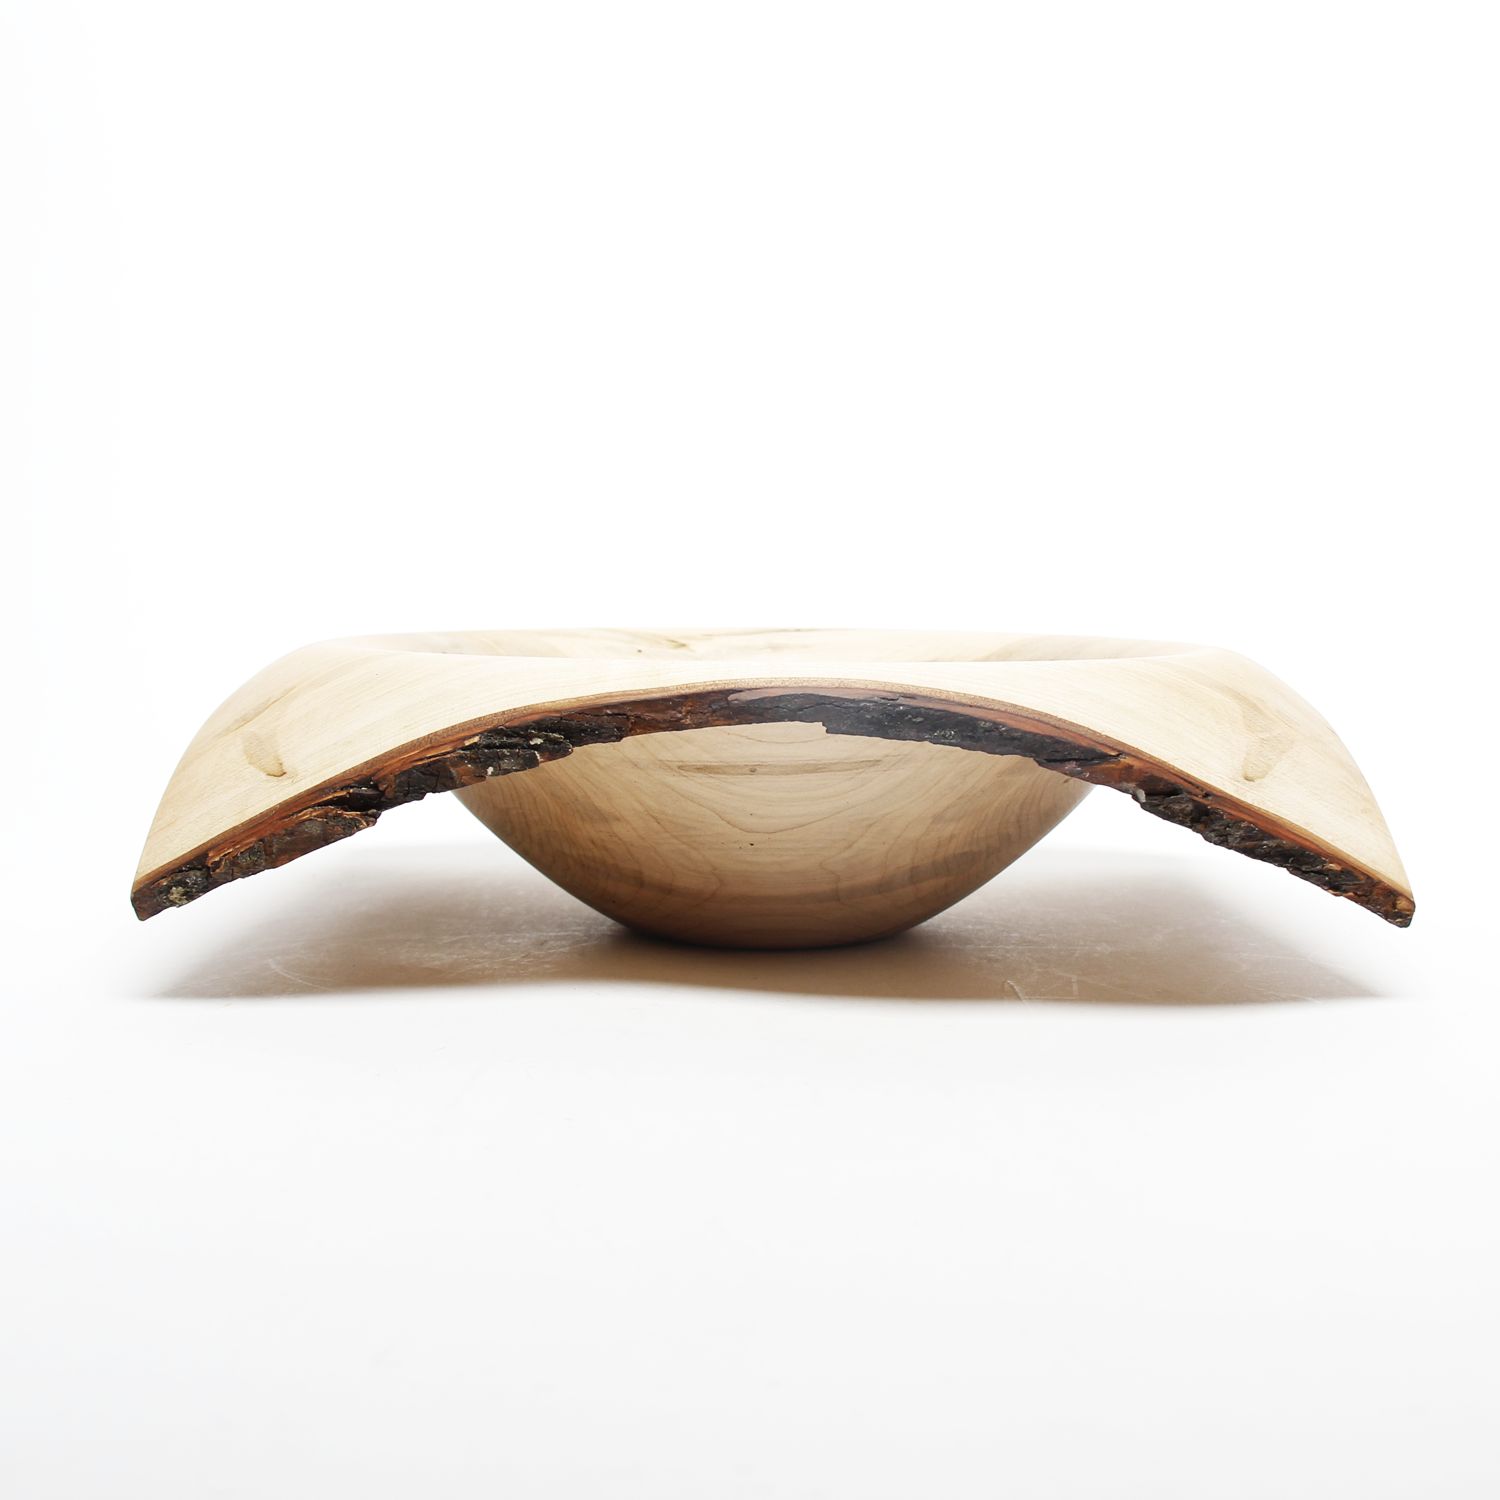 Larry A. Cluchey: Bowl 11 Product Image 1 of 3